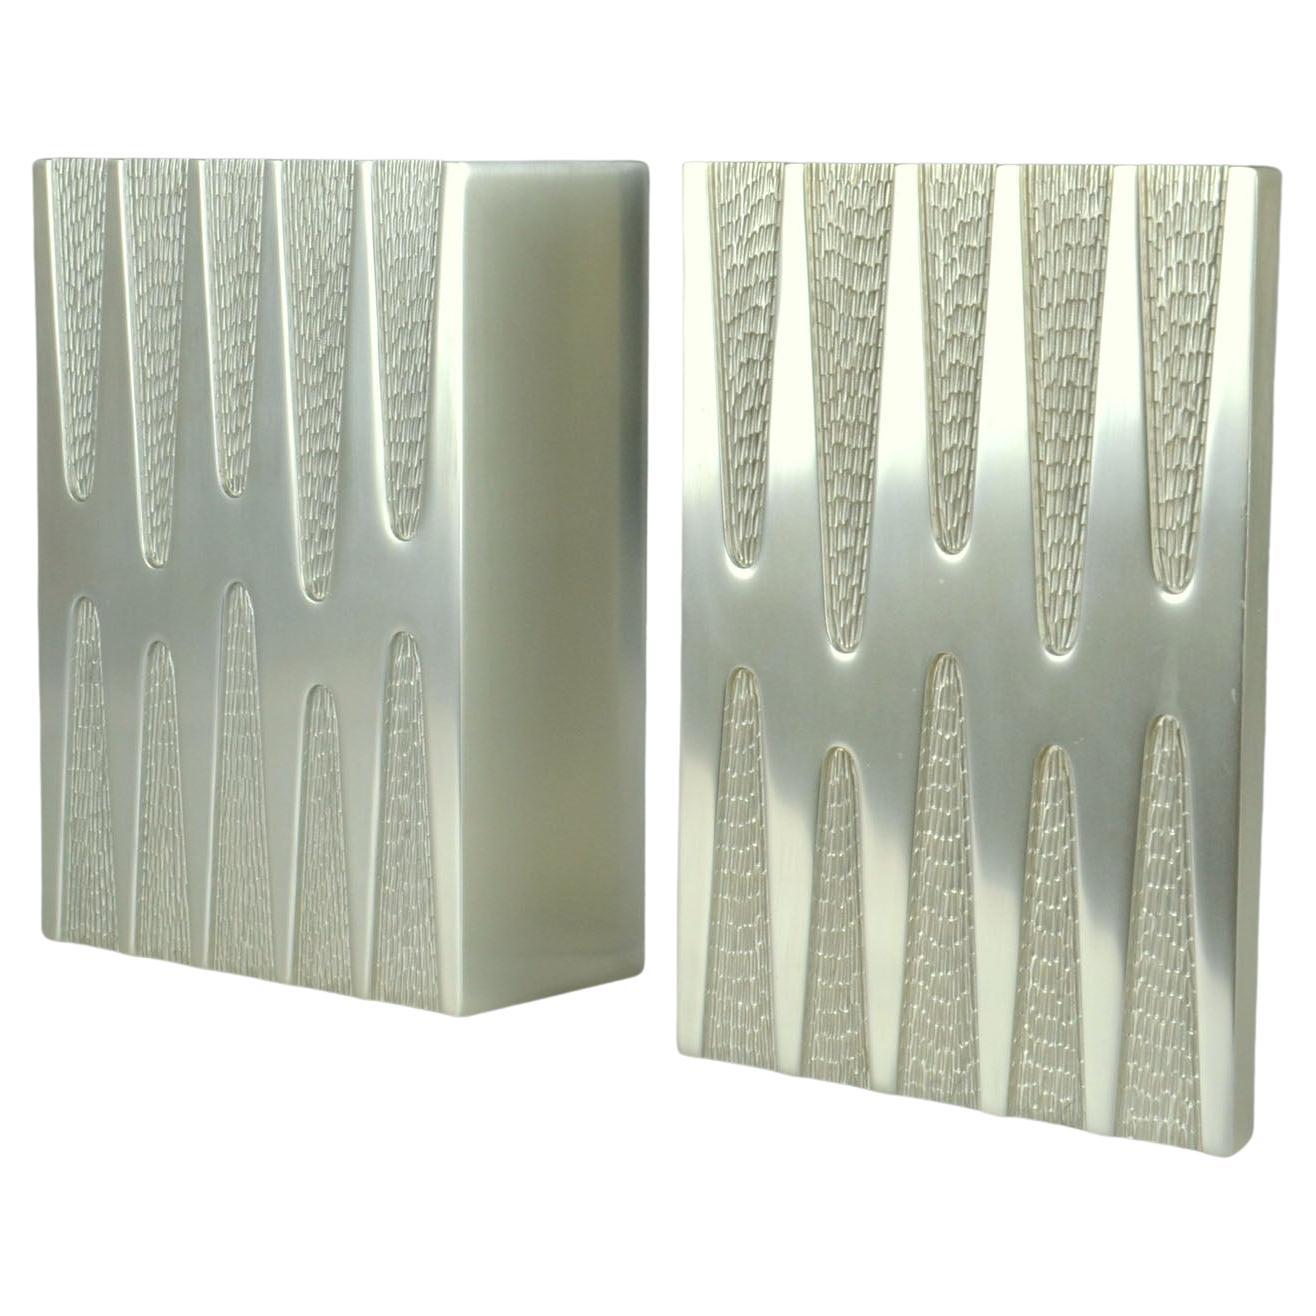 Solid rectangular aluminium push and pull door handles in with etched relief motive. They are unused in the original box
The handle can be applied inside or outside on a single door. It can also be used cupboard doors and kitchen units.
The handles